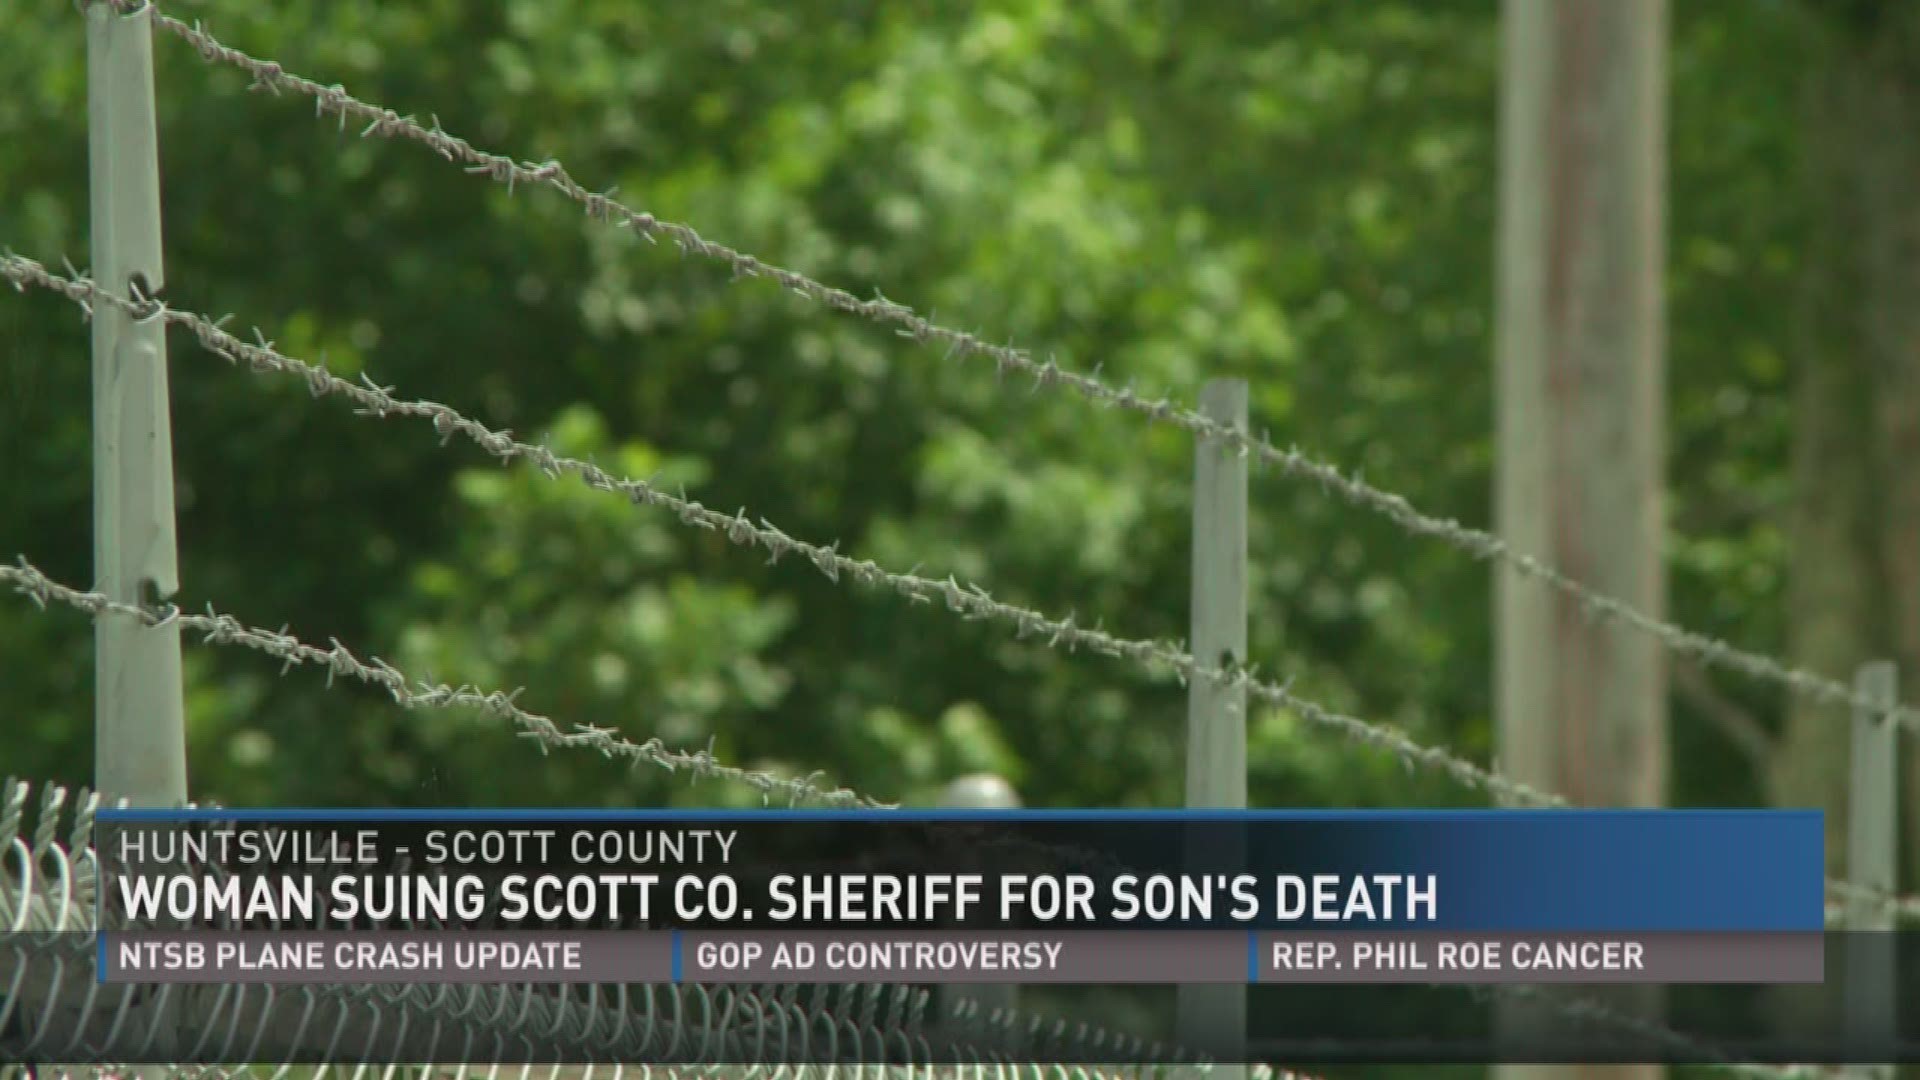 Woman Suing Scott Co. Sheriff For Son's Death